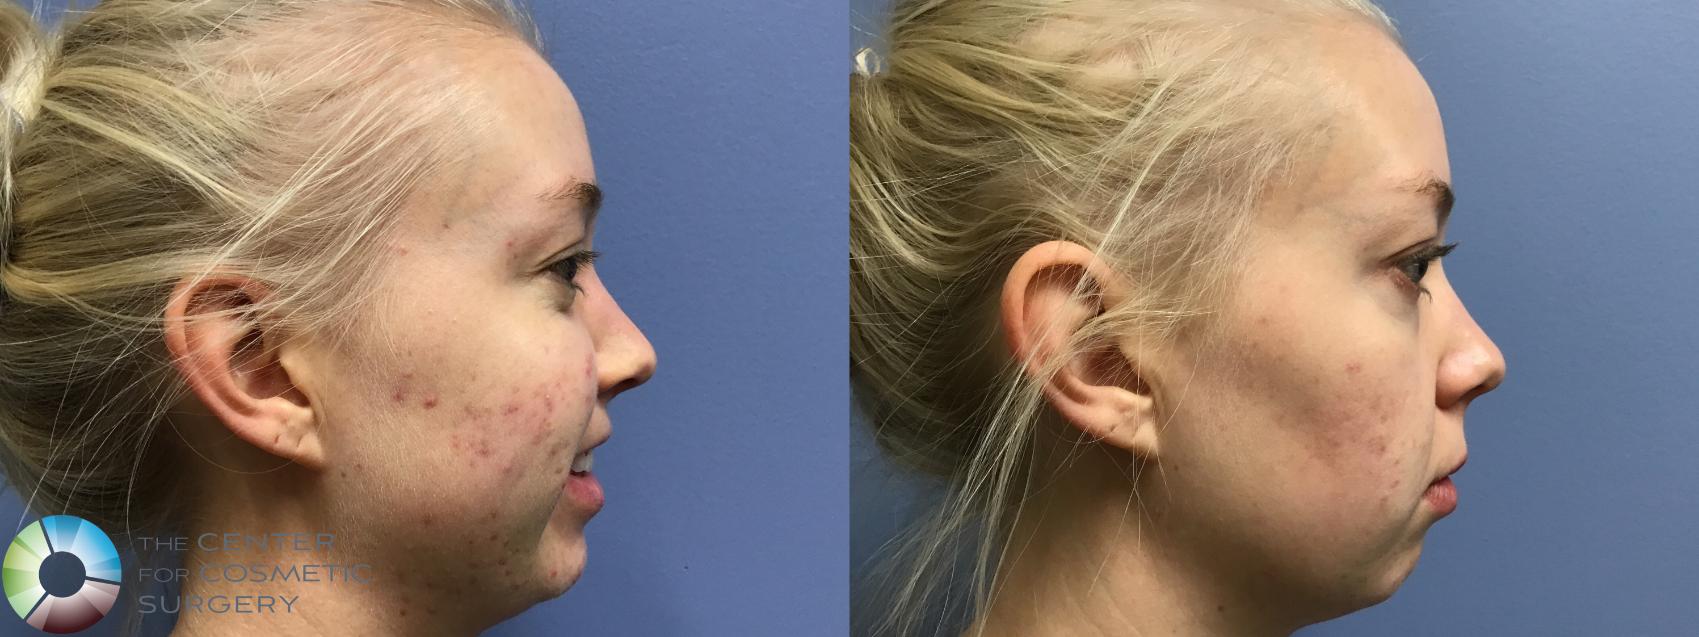 Before & After Chemical Peels/Microdermabrasion Case 11598 Right Side View in Golden, CO